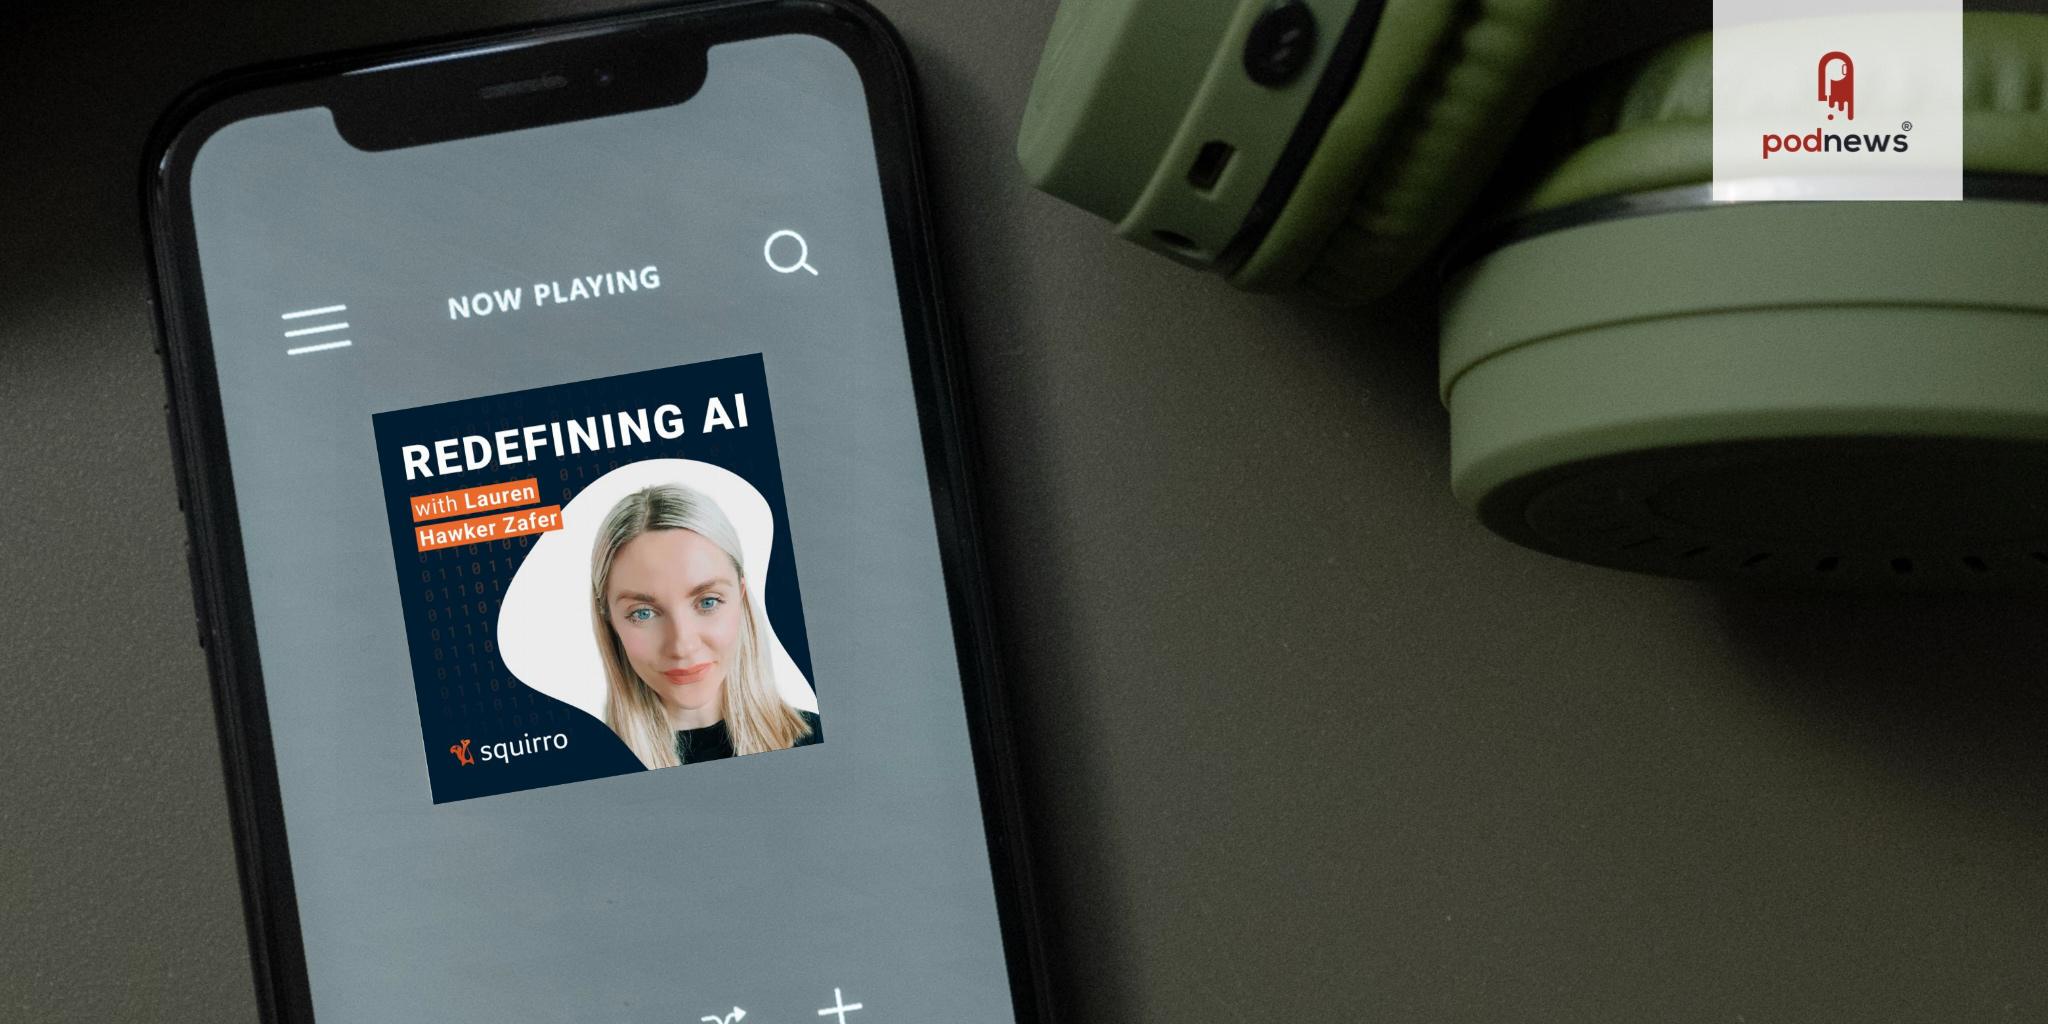 Squirro Launches Second Season of Redefining AI Podcast